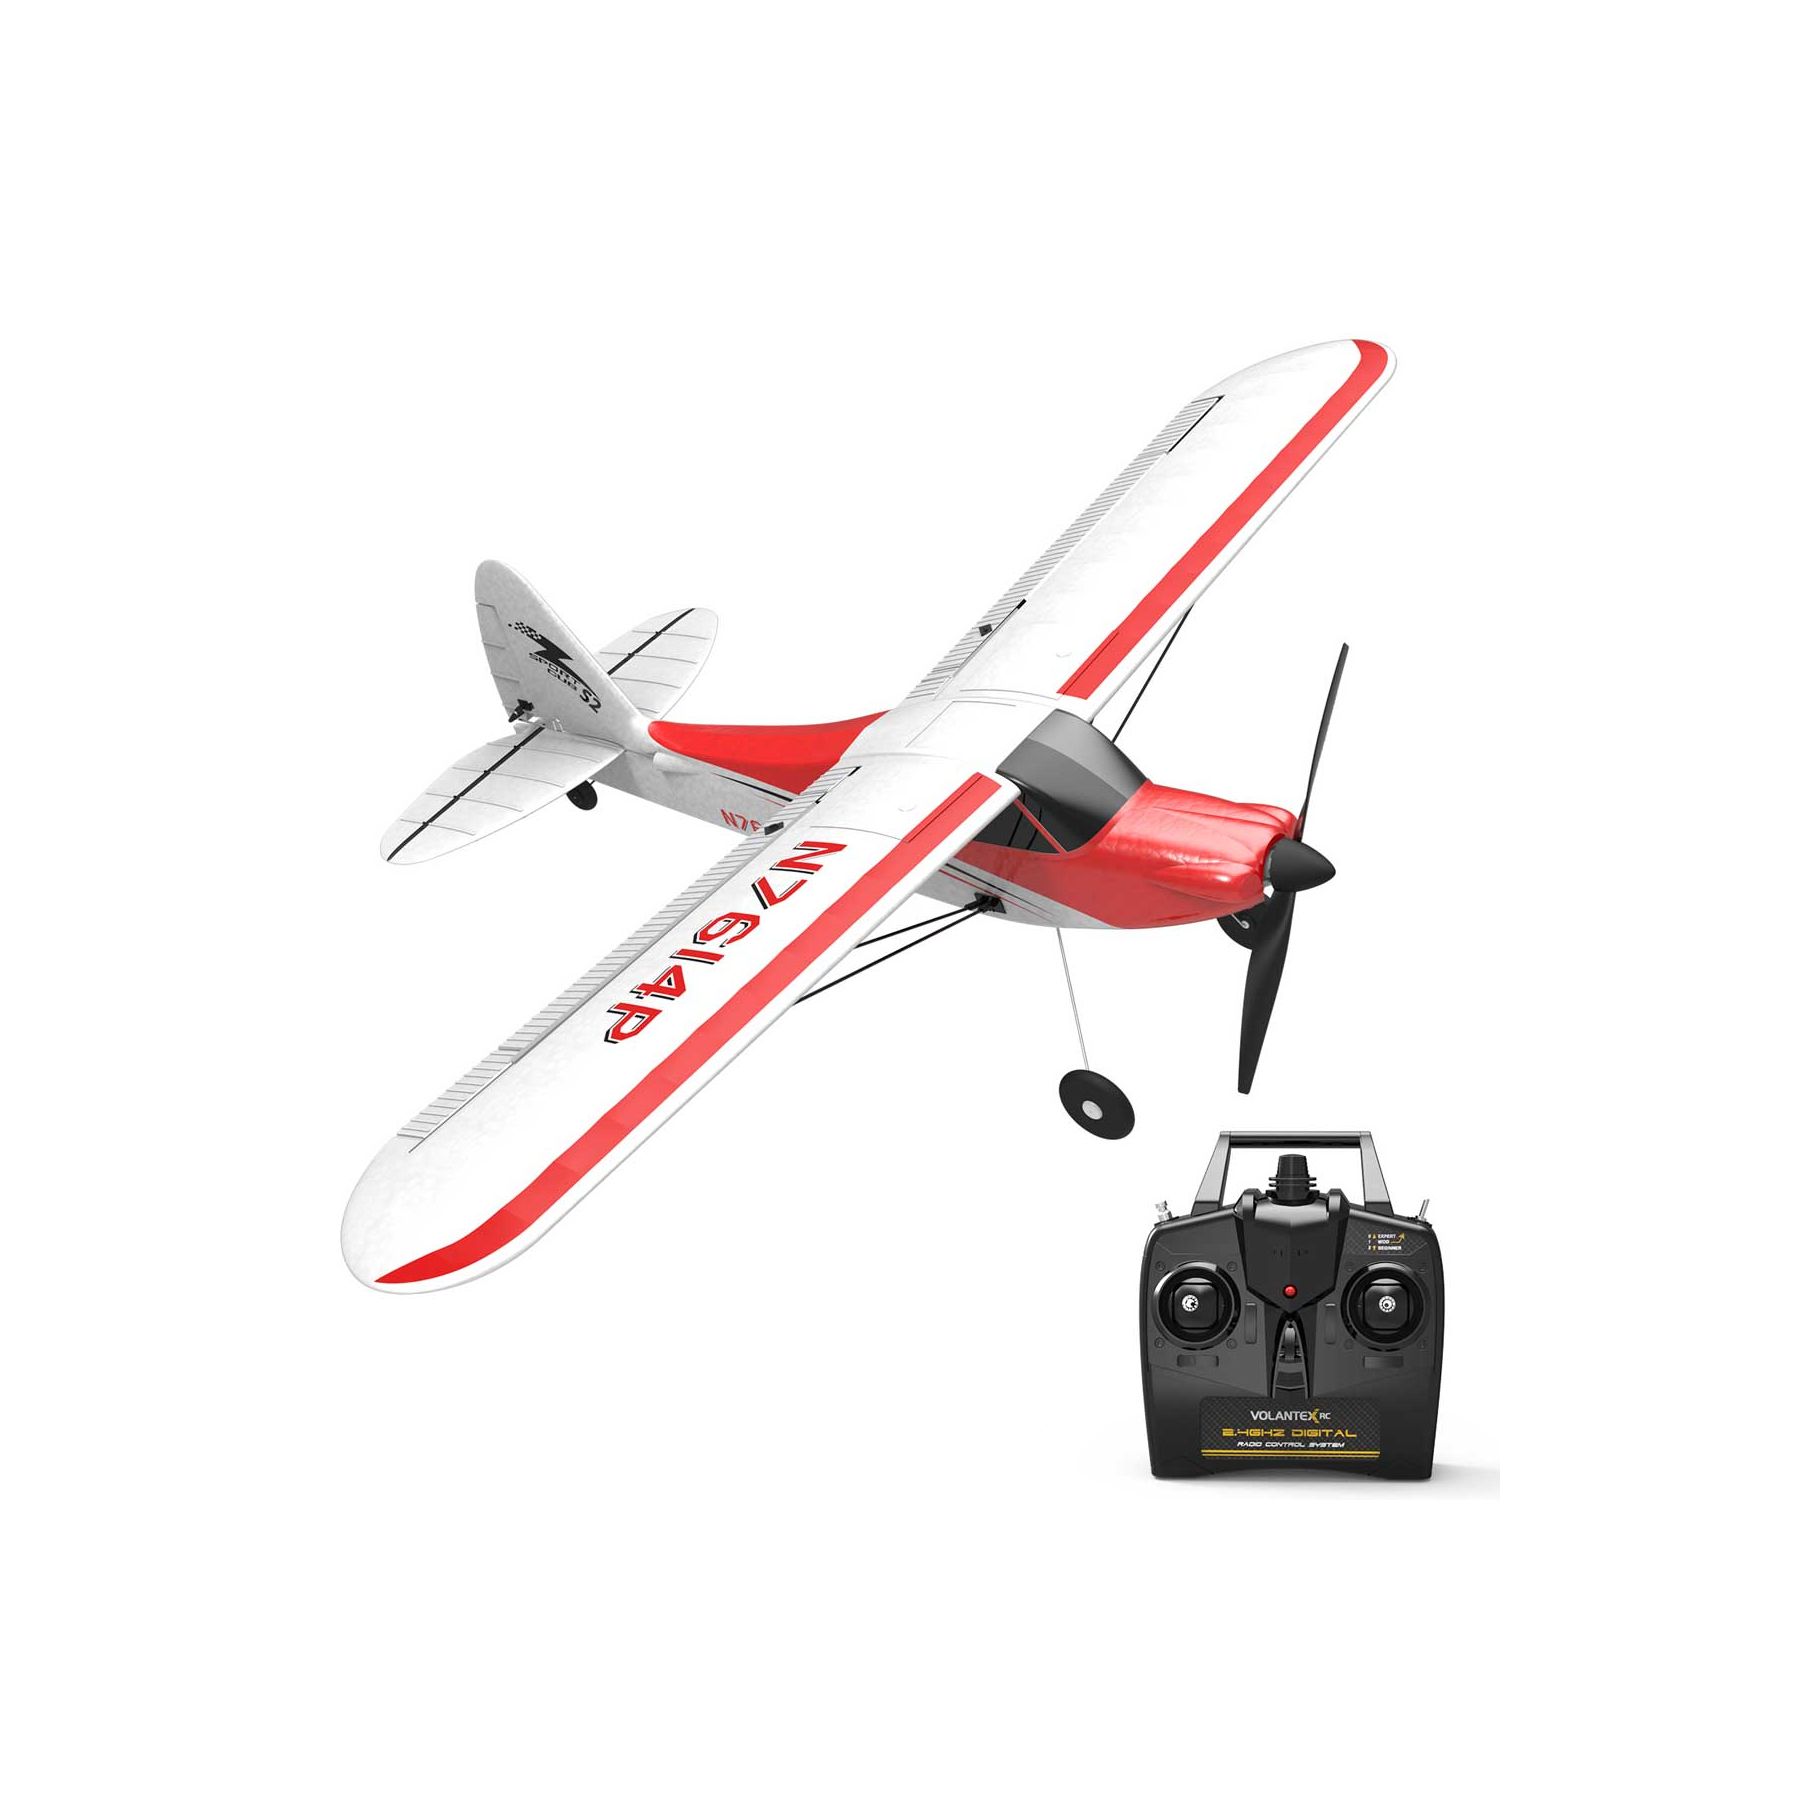 2.4GHz Radio Control Aircraft with 6-Axis Gyro Stabilizer 761-2 RTF RC Glider Plane Remote Control Airplane Ranger600 Ready to Fly One-Key Return Function for Beginners